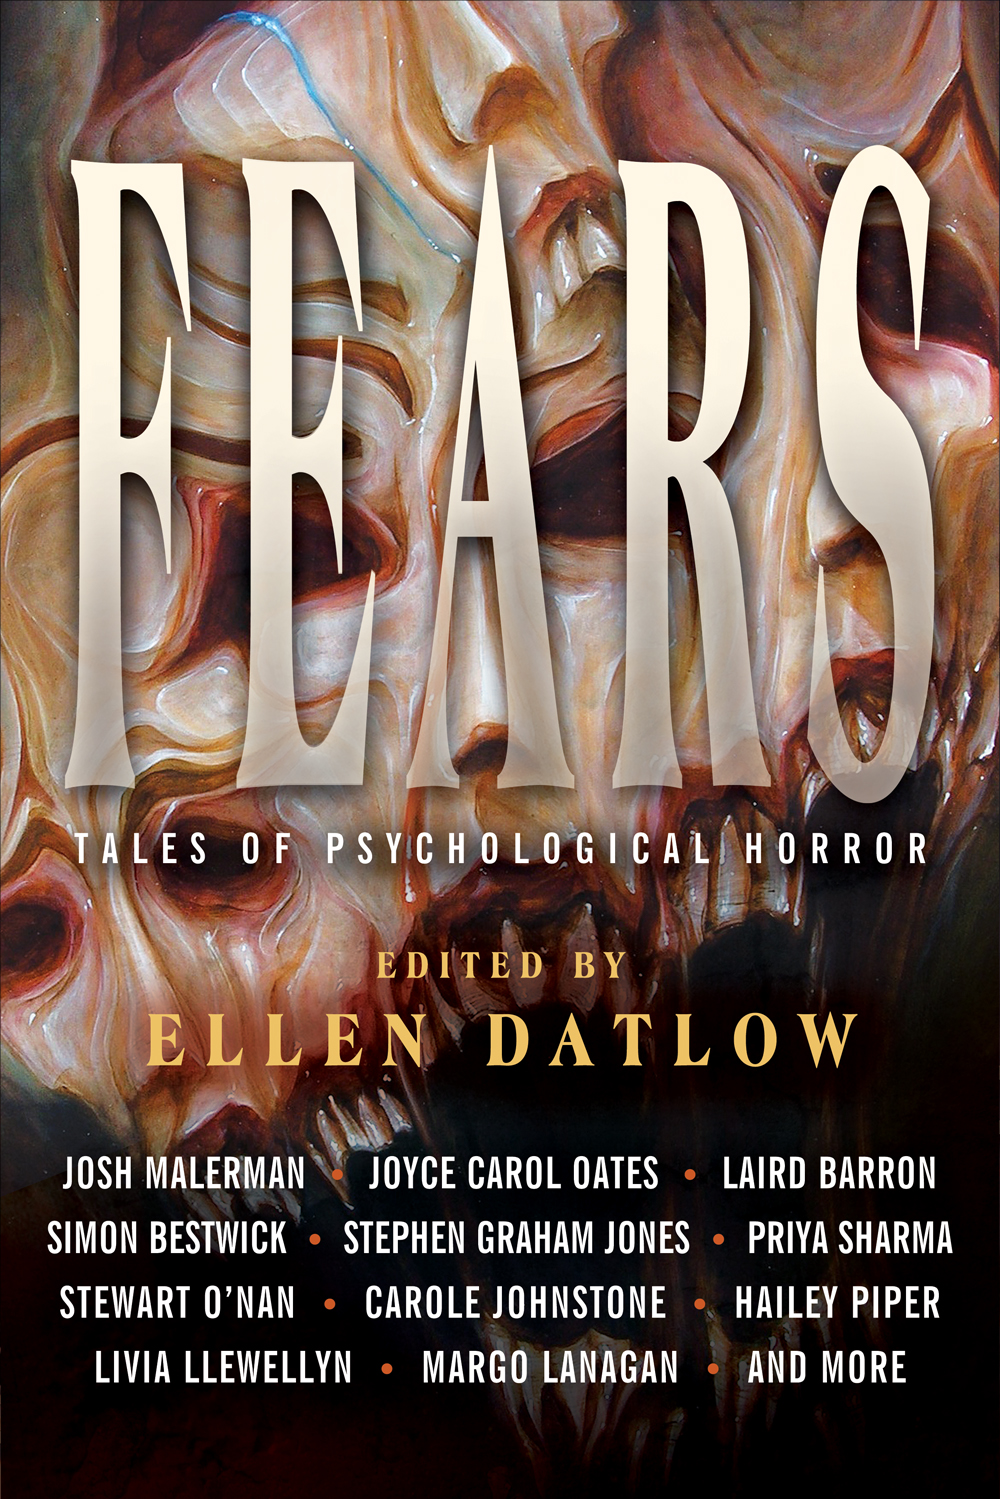 Cover of Fears: Tales of Psychological Horror, edited by Ellen Datlow